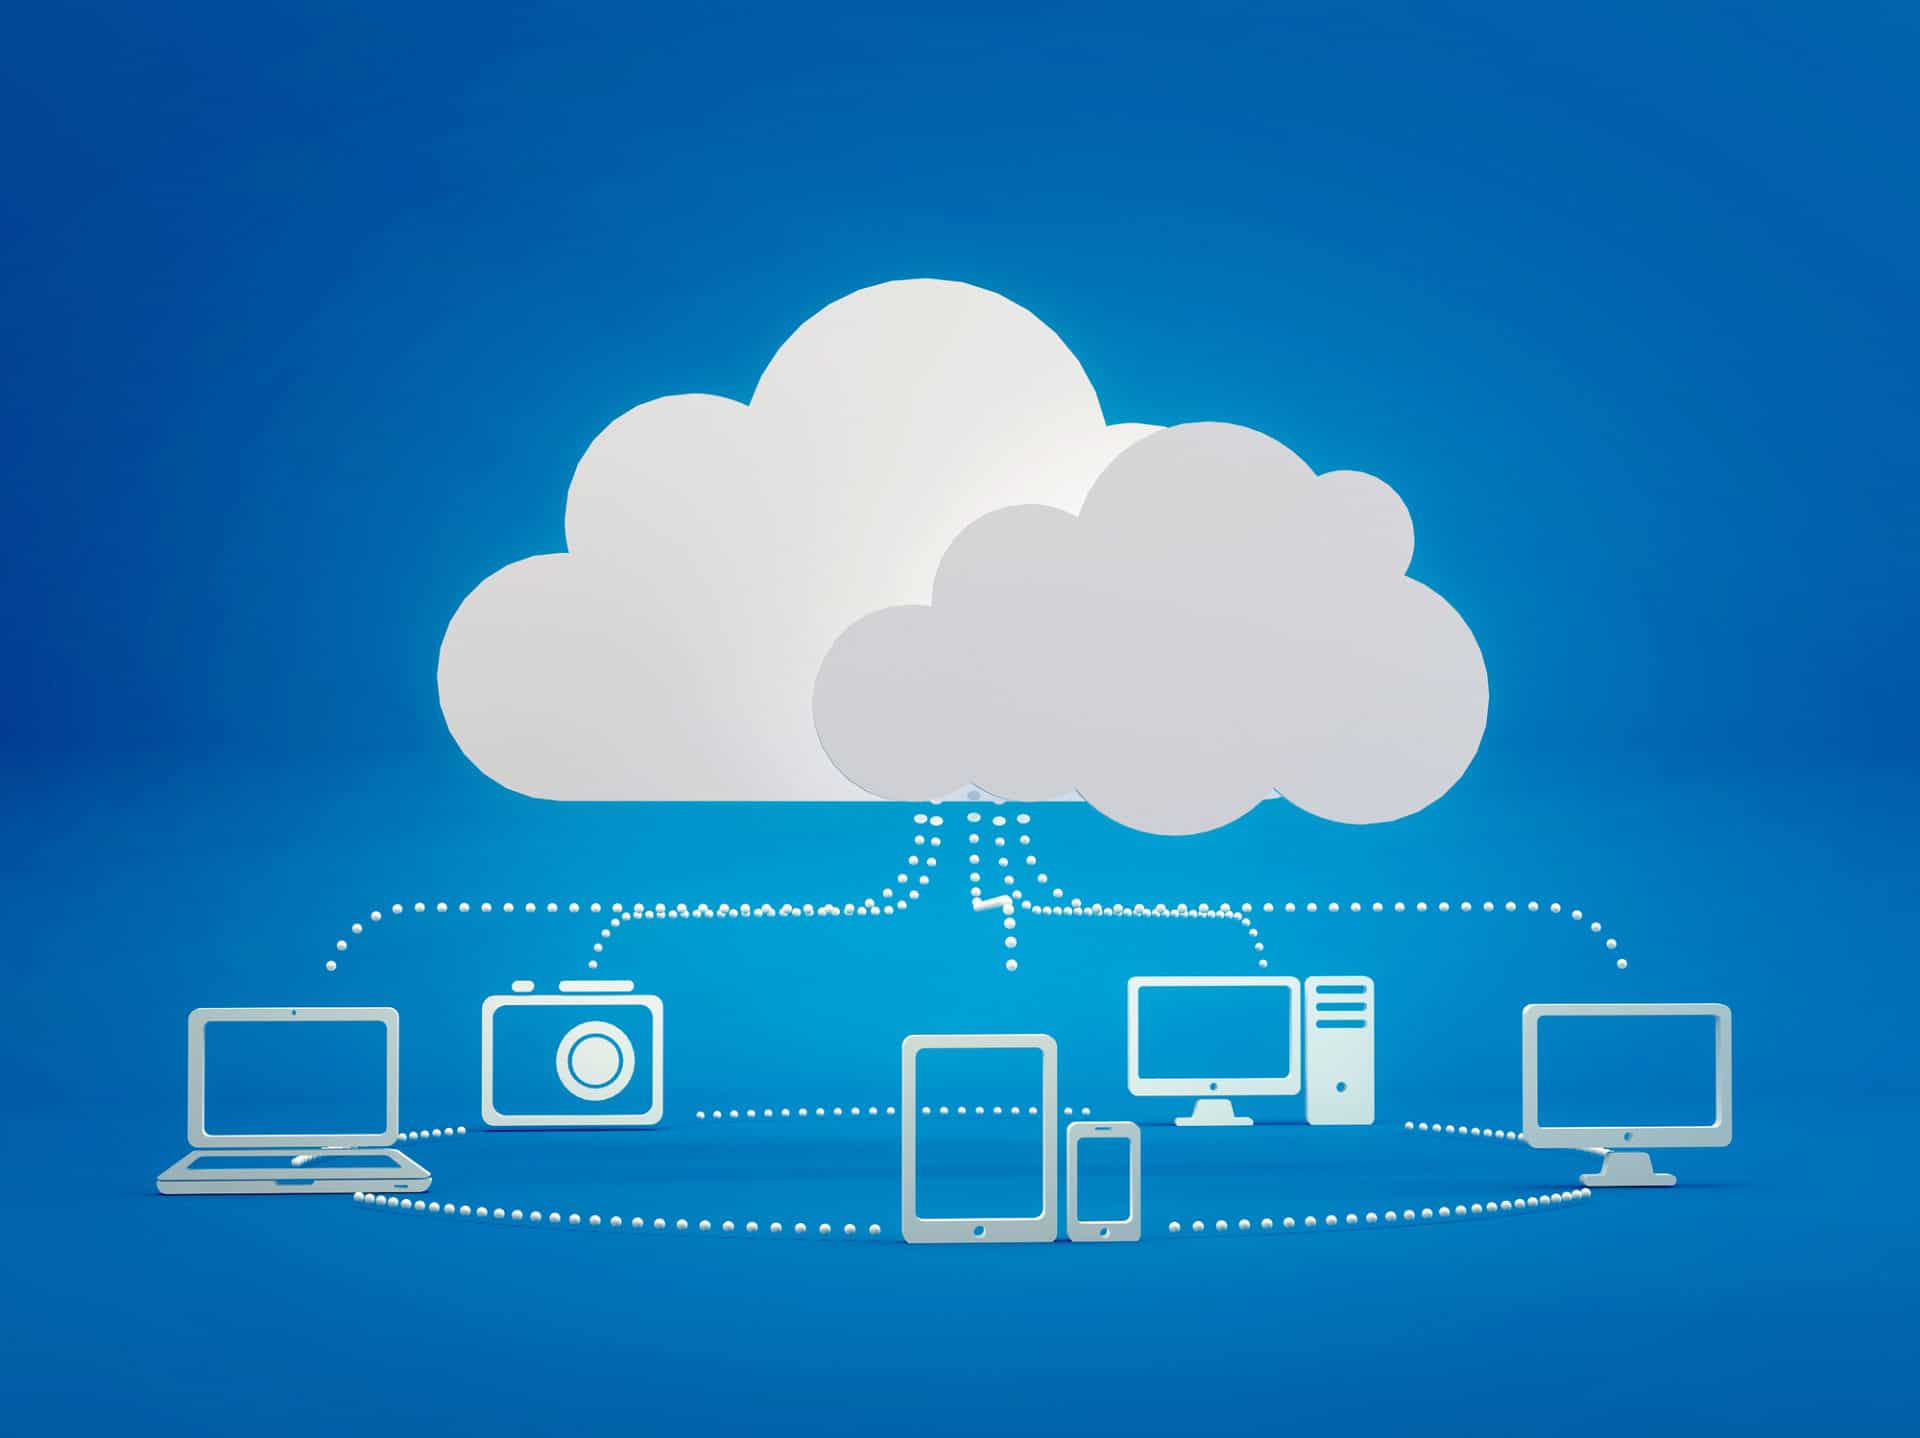 Illustration of cloud backup. Illustration shows PCs, laptops, tablets and mobile devices connected to cloud backup storage.